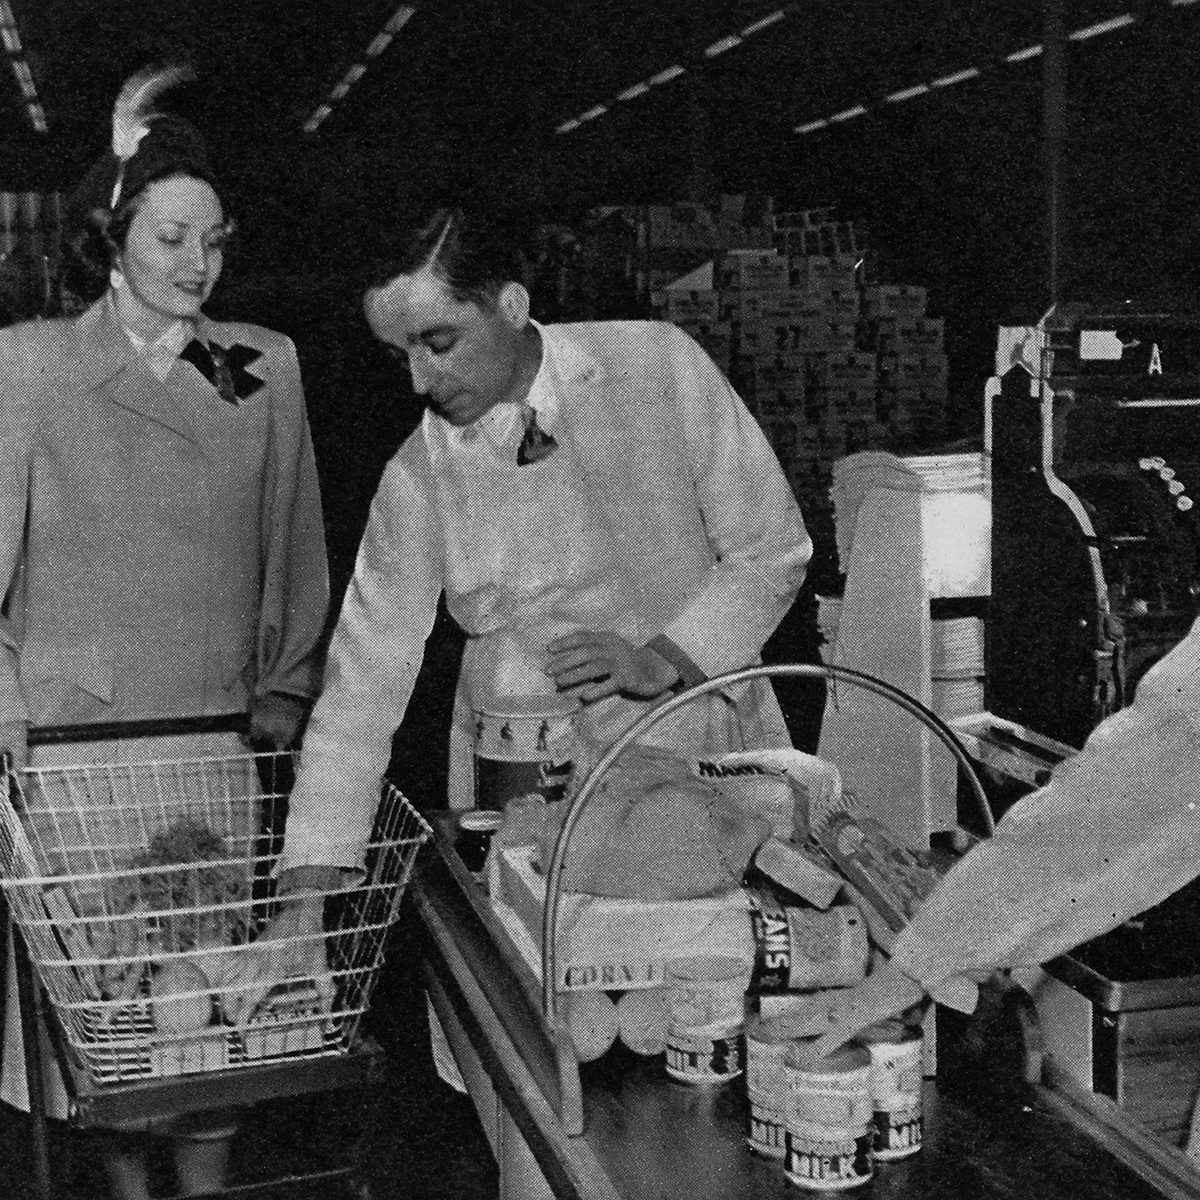 Mandatory Credit: Photo by Historia/REX/Shutterstock (7665149mo) Photograph Taken From A United States Supermarket in 1948 'Where Britain's Queues and Rations Are Unknown' Showing A Woman Being Served at the Checkout the Concept of the Supermarket where All Manner of Goods Could Be Bought in One Place Without the Assistance of A Shop Keeper and Then Paid For at A Checkout Was First Introduced in America where Rationing Did not Feature Following World War Ii This Picture Was One of A Series Taken in an A&p Supermarket; America's Largest Chain Begun in 1937 and with 1670 Supermarkets by 1948 1948 Historical Collection 78